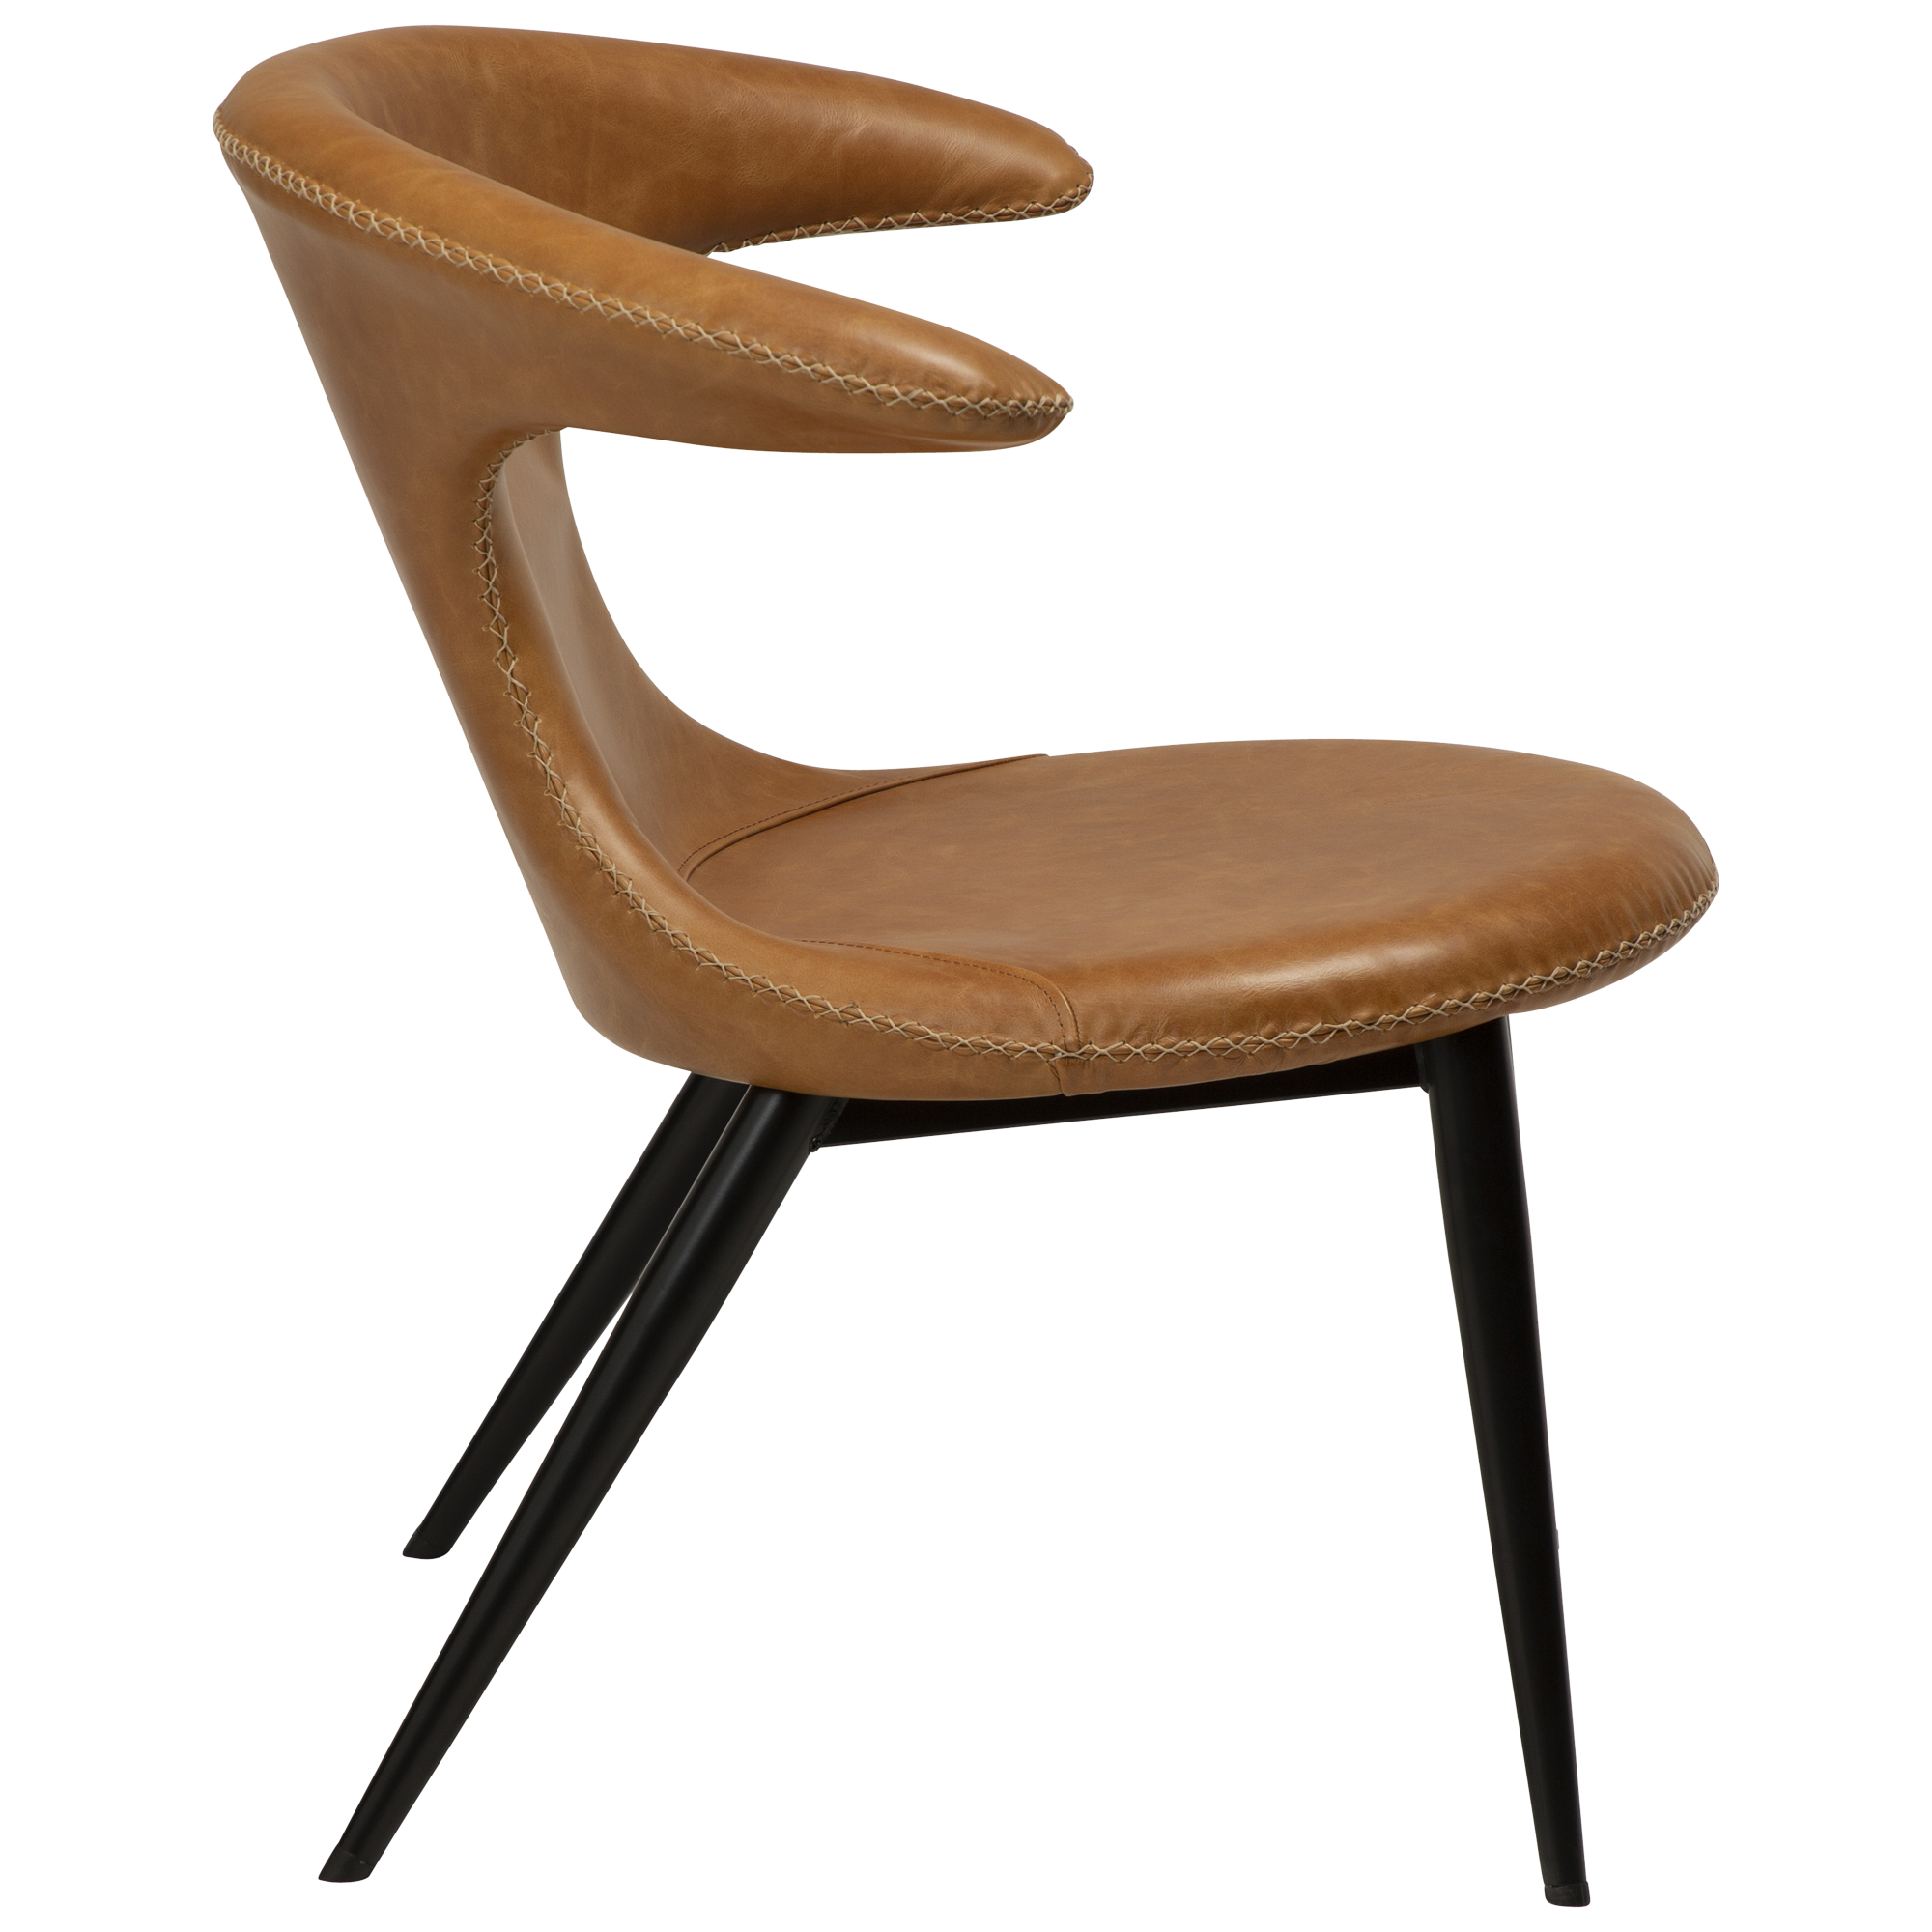 Flair Lounge Chair Light Brown Leather With Black Conical Metal Legs 700222360 03 Profile